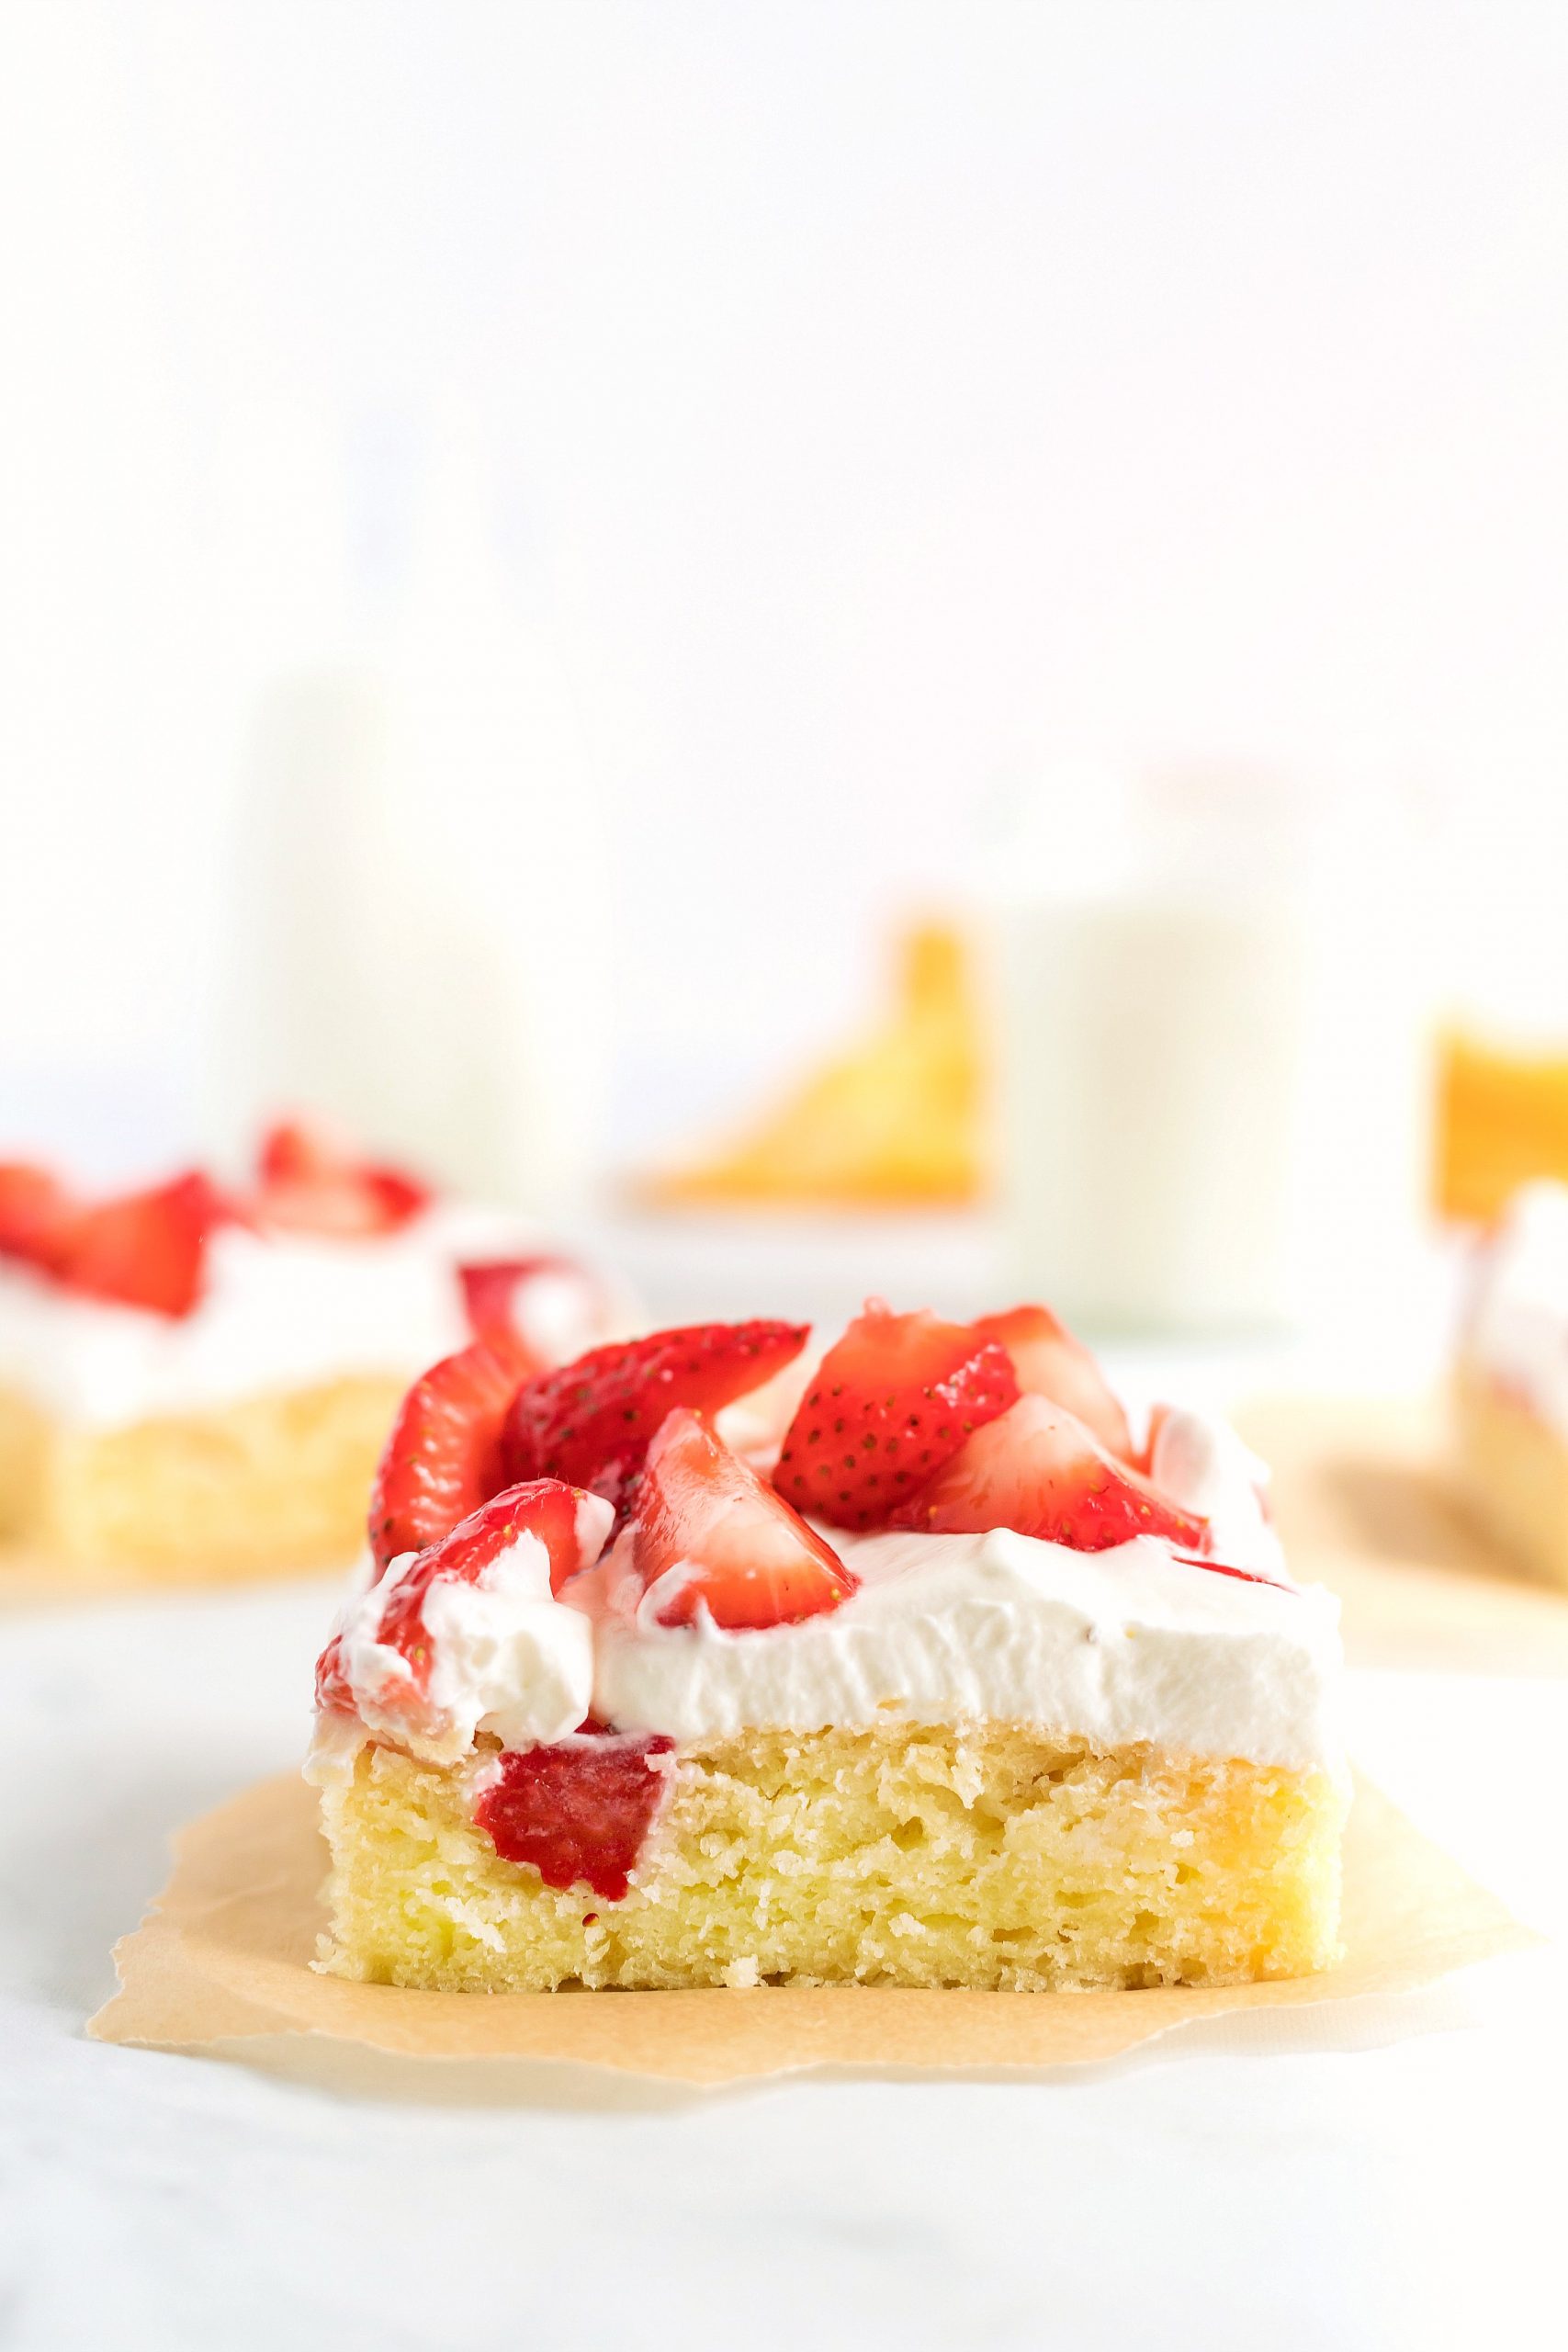 Ripe, red, sweet and delicious strawberries make this moist cake twice as good.